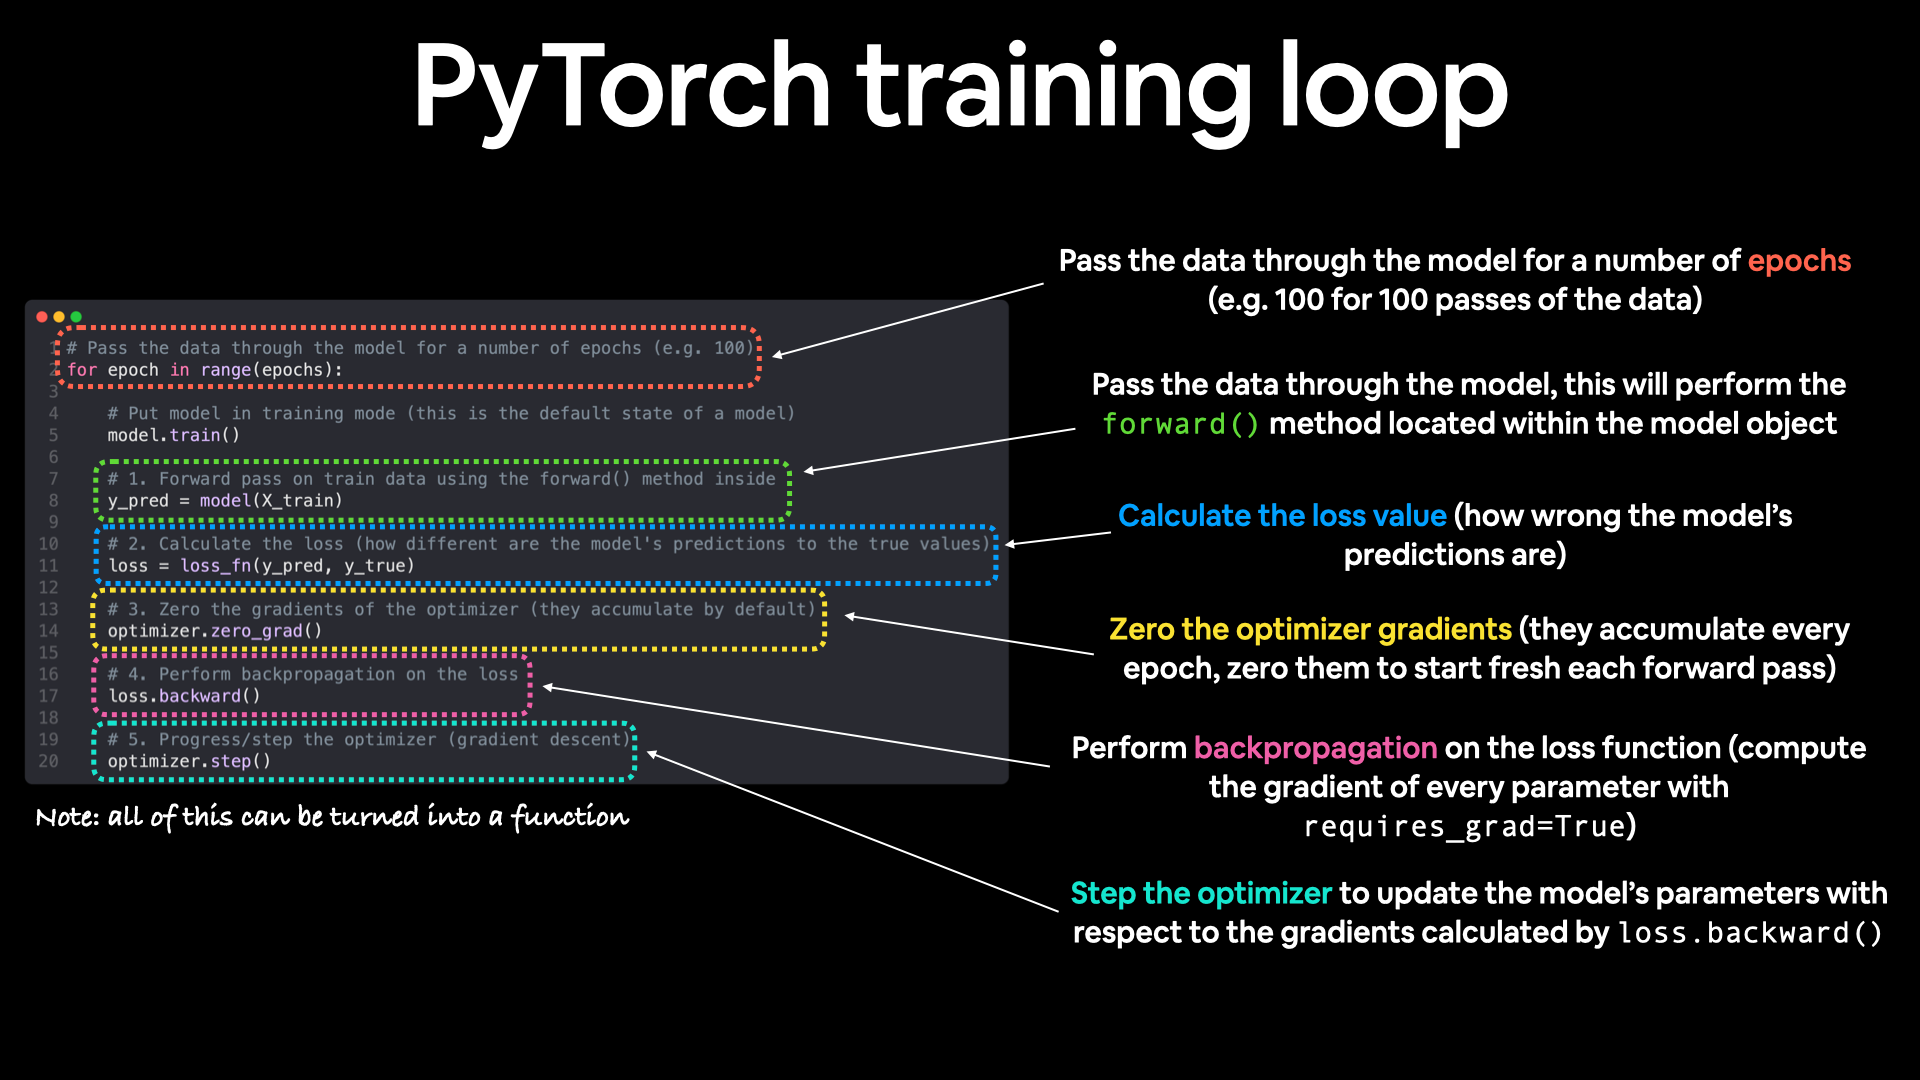 steps in a PyTorch training loop